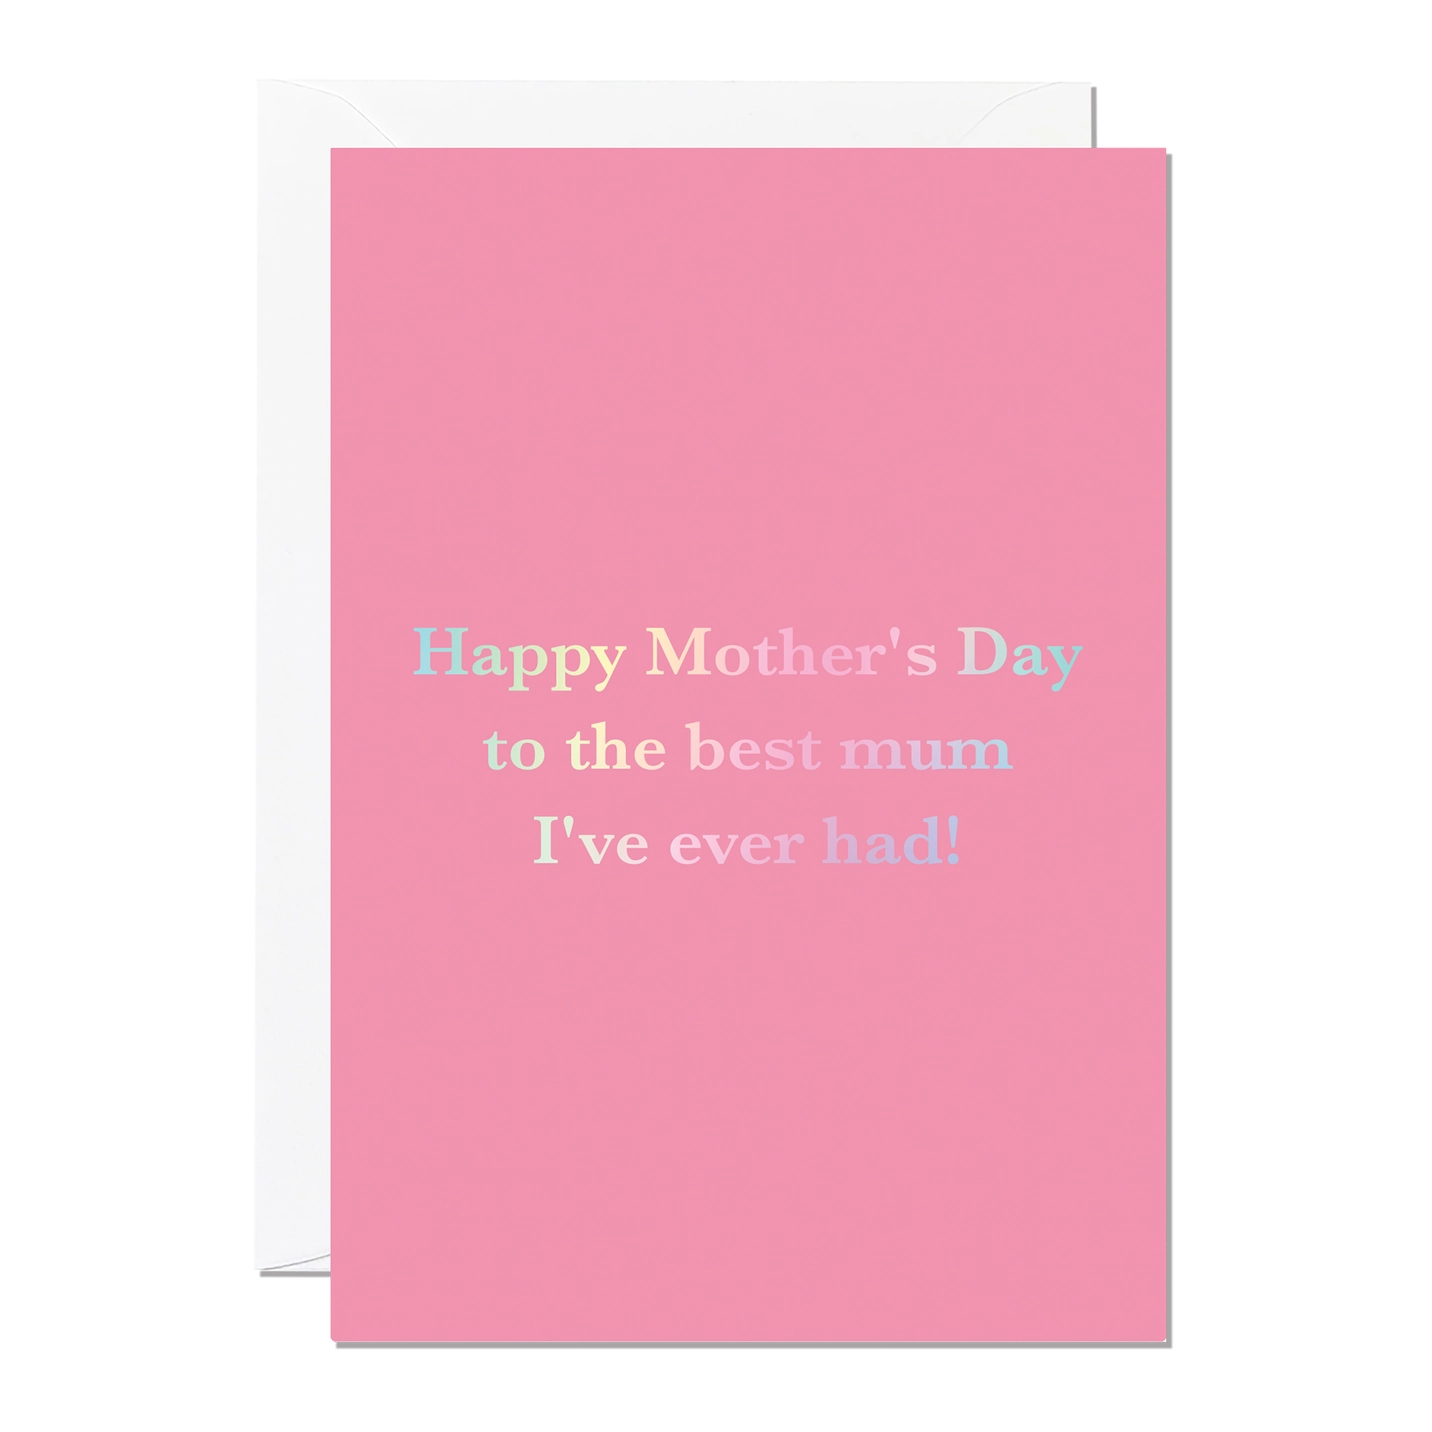 Happy Mothers day to the best mum Ive ever had is bossed in a lovely irridised lettering on a warm pink background.